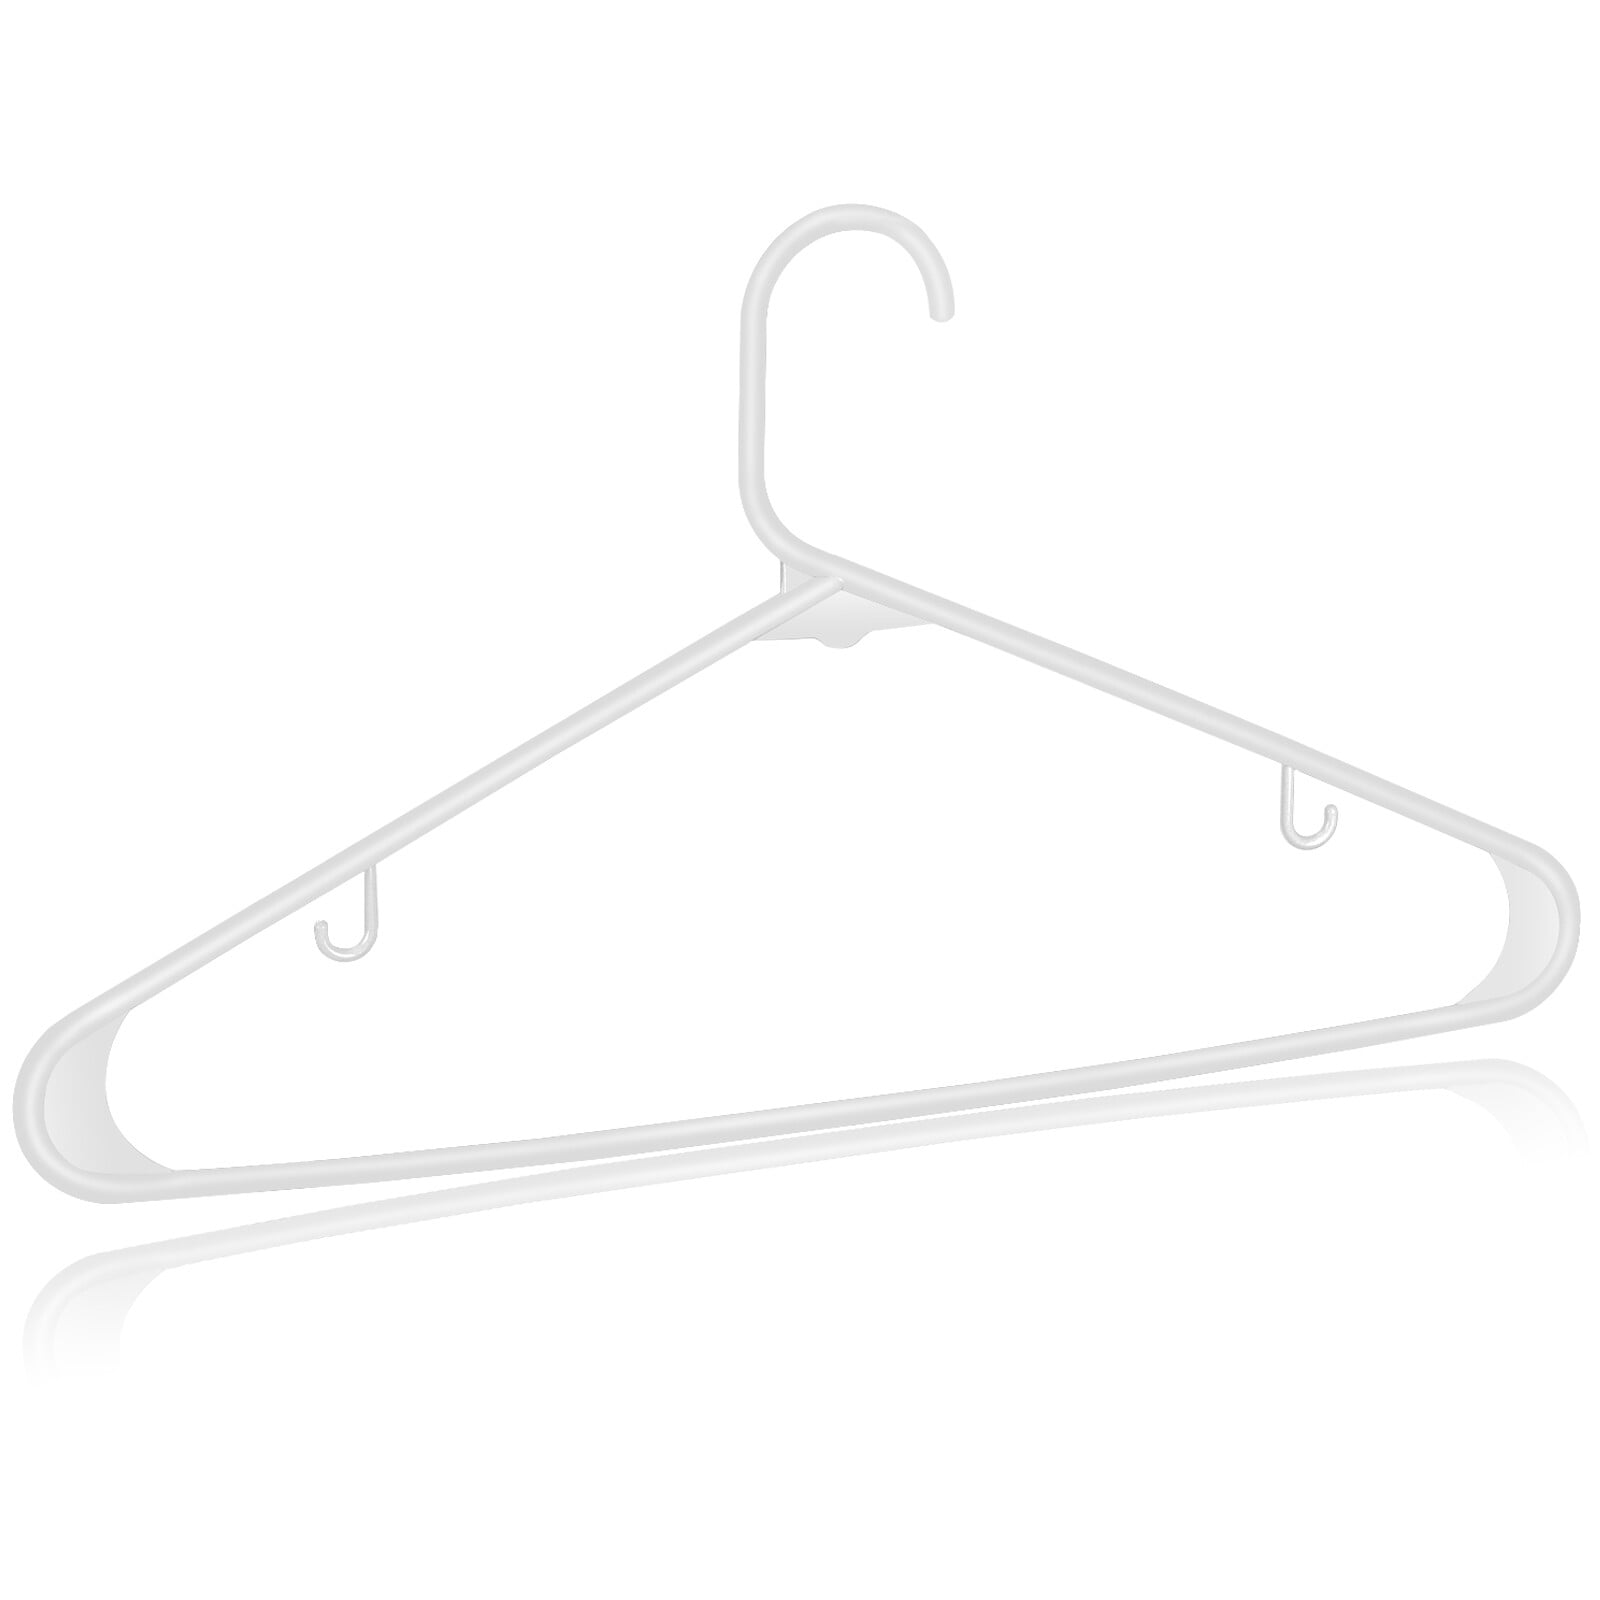 Plastic Hangers 100 Pack Blue - Clothes Hangers - Makes The Perfect Coat Hanger and General Space Saving Clothes Hangers for Closet - Percheros